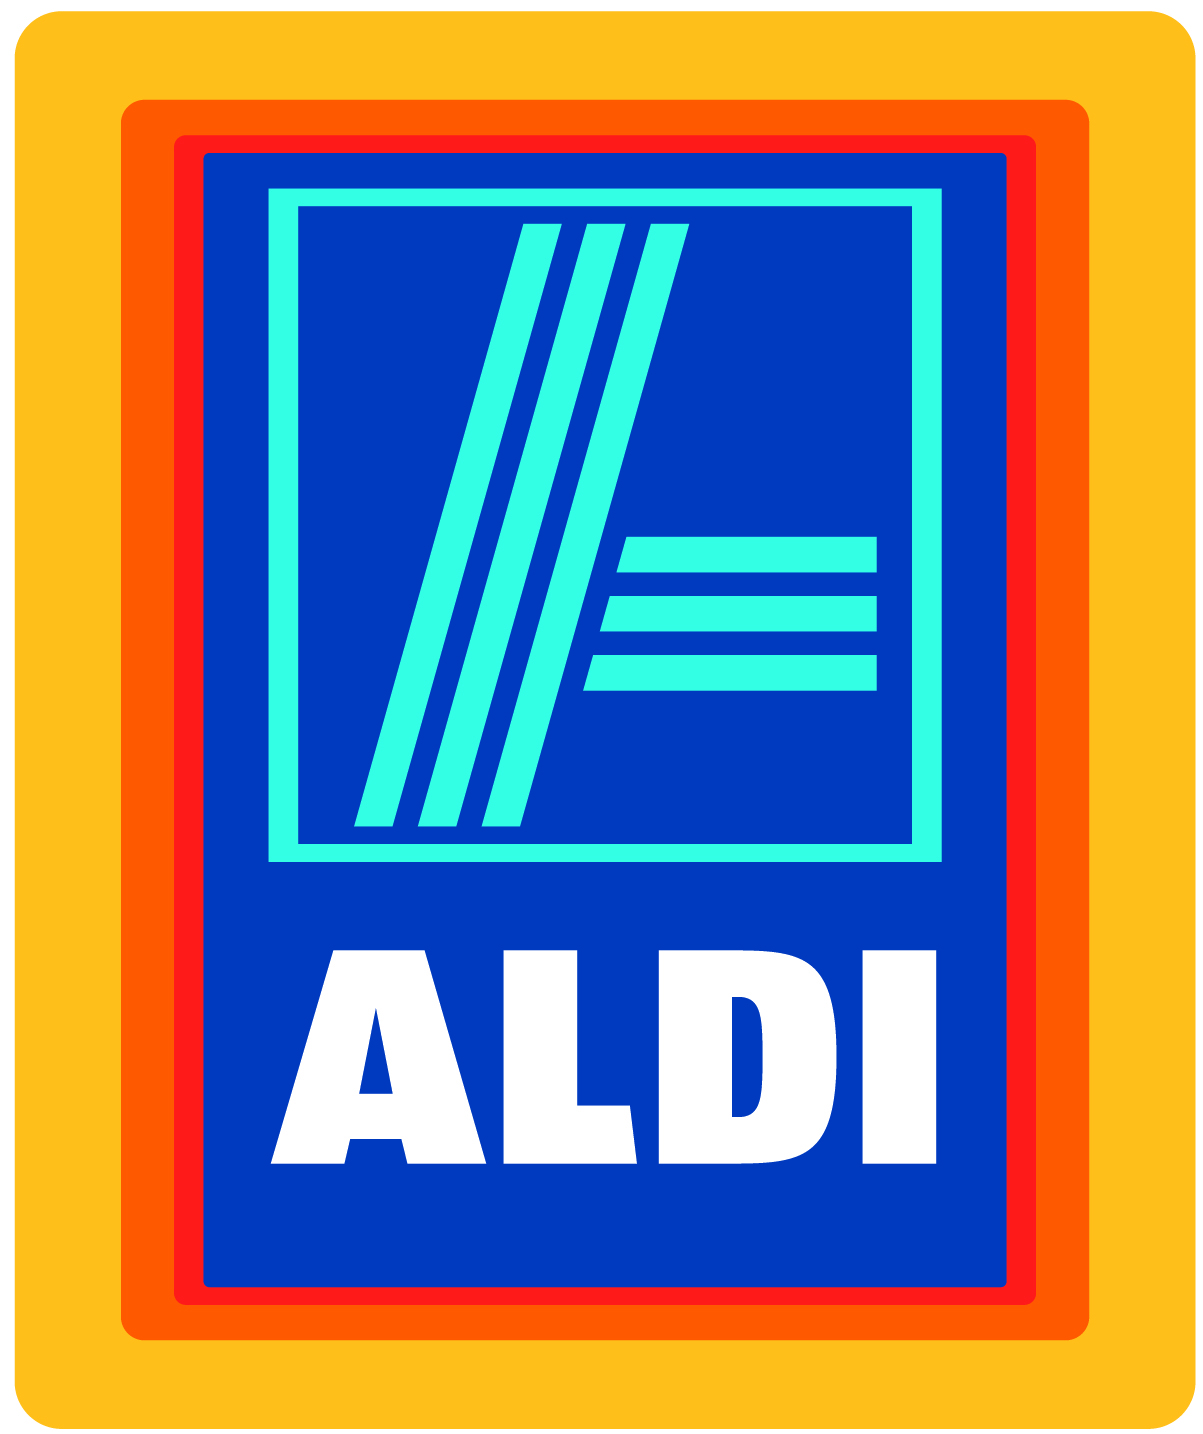 Aldi’s philosophy: “Everyday top quality groceries at the ...